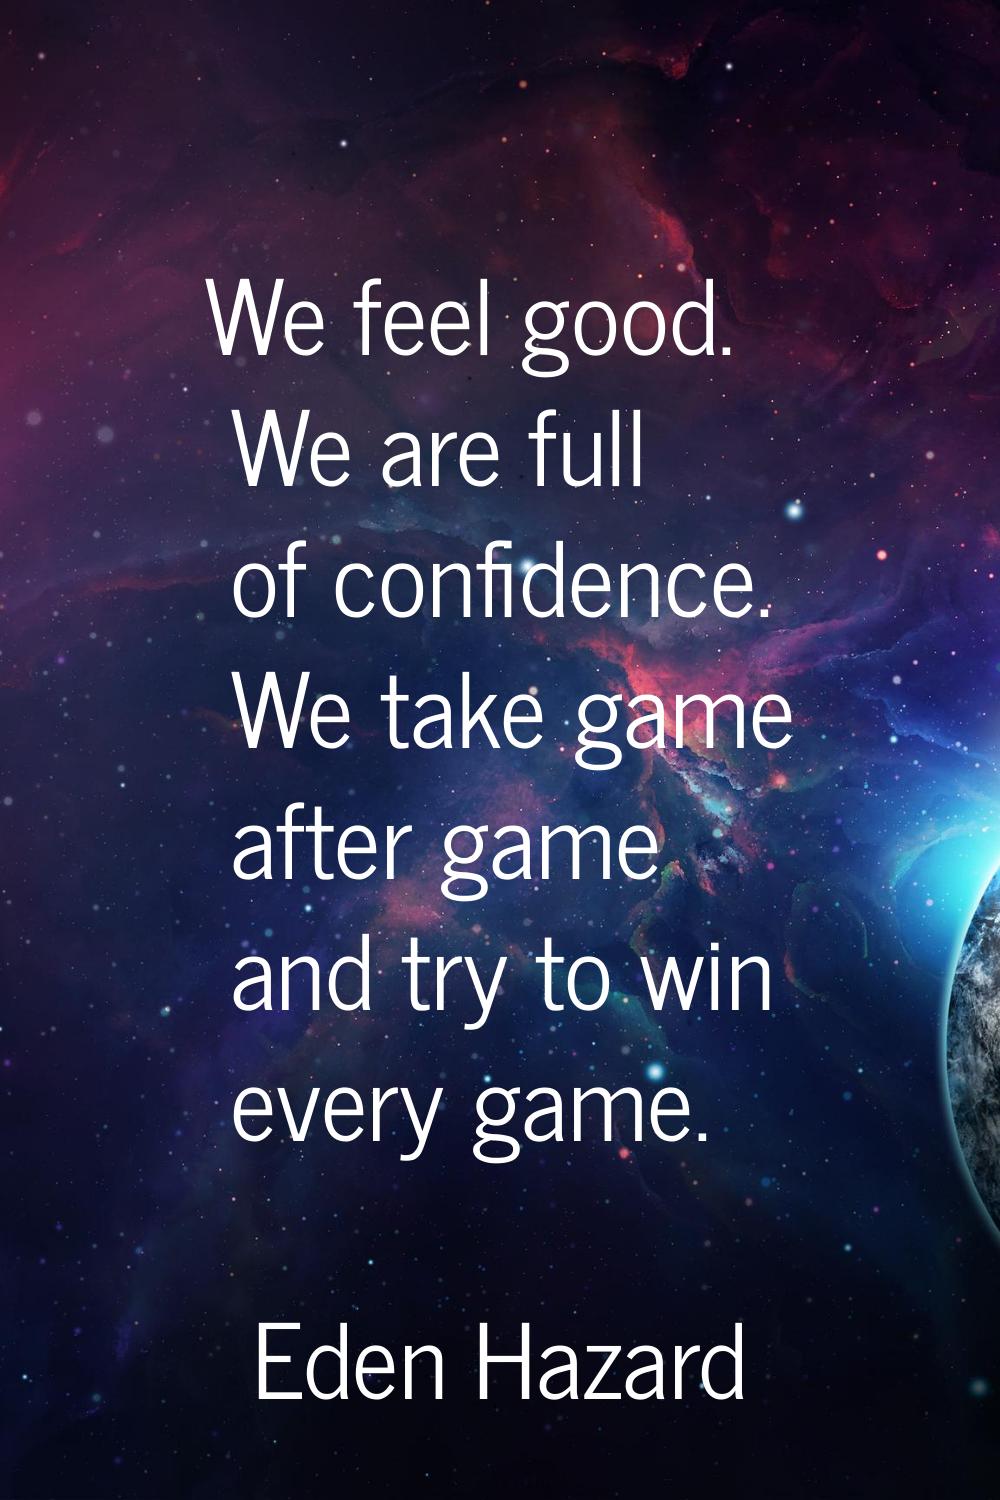 We feel good. We are full of confidence. We take game after game and try to win every game.